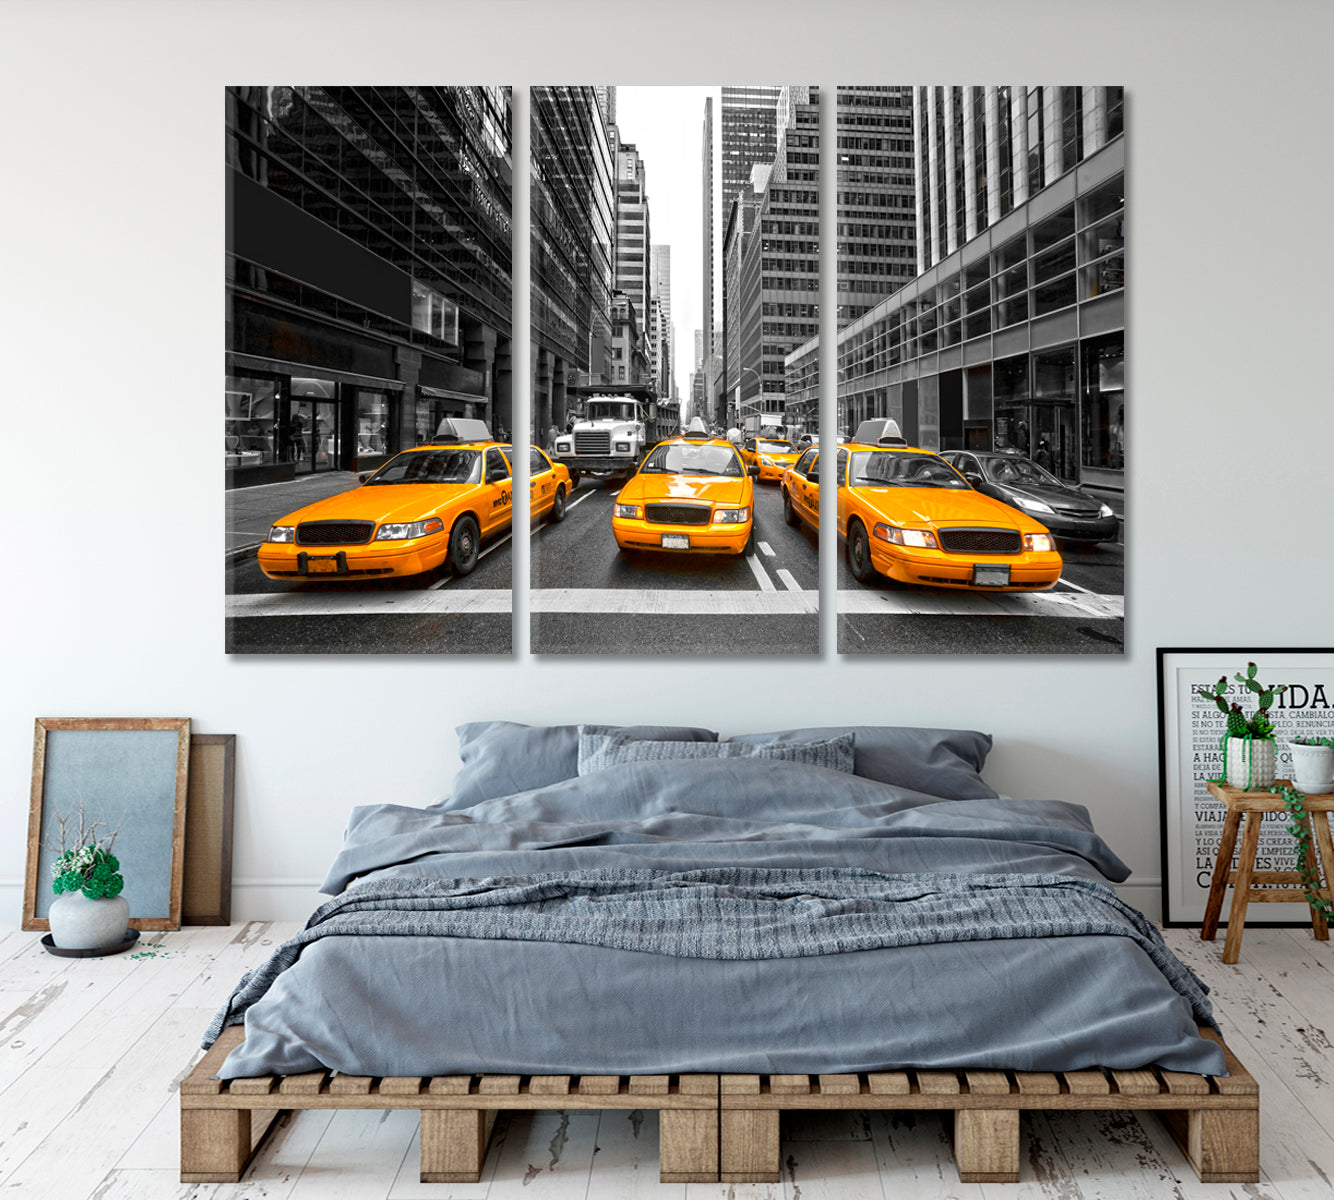 YELLOW TAXI 5th Avenue New York City Cities Wall Art Artesty 3 panels 36" x 24" 